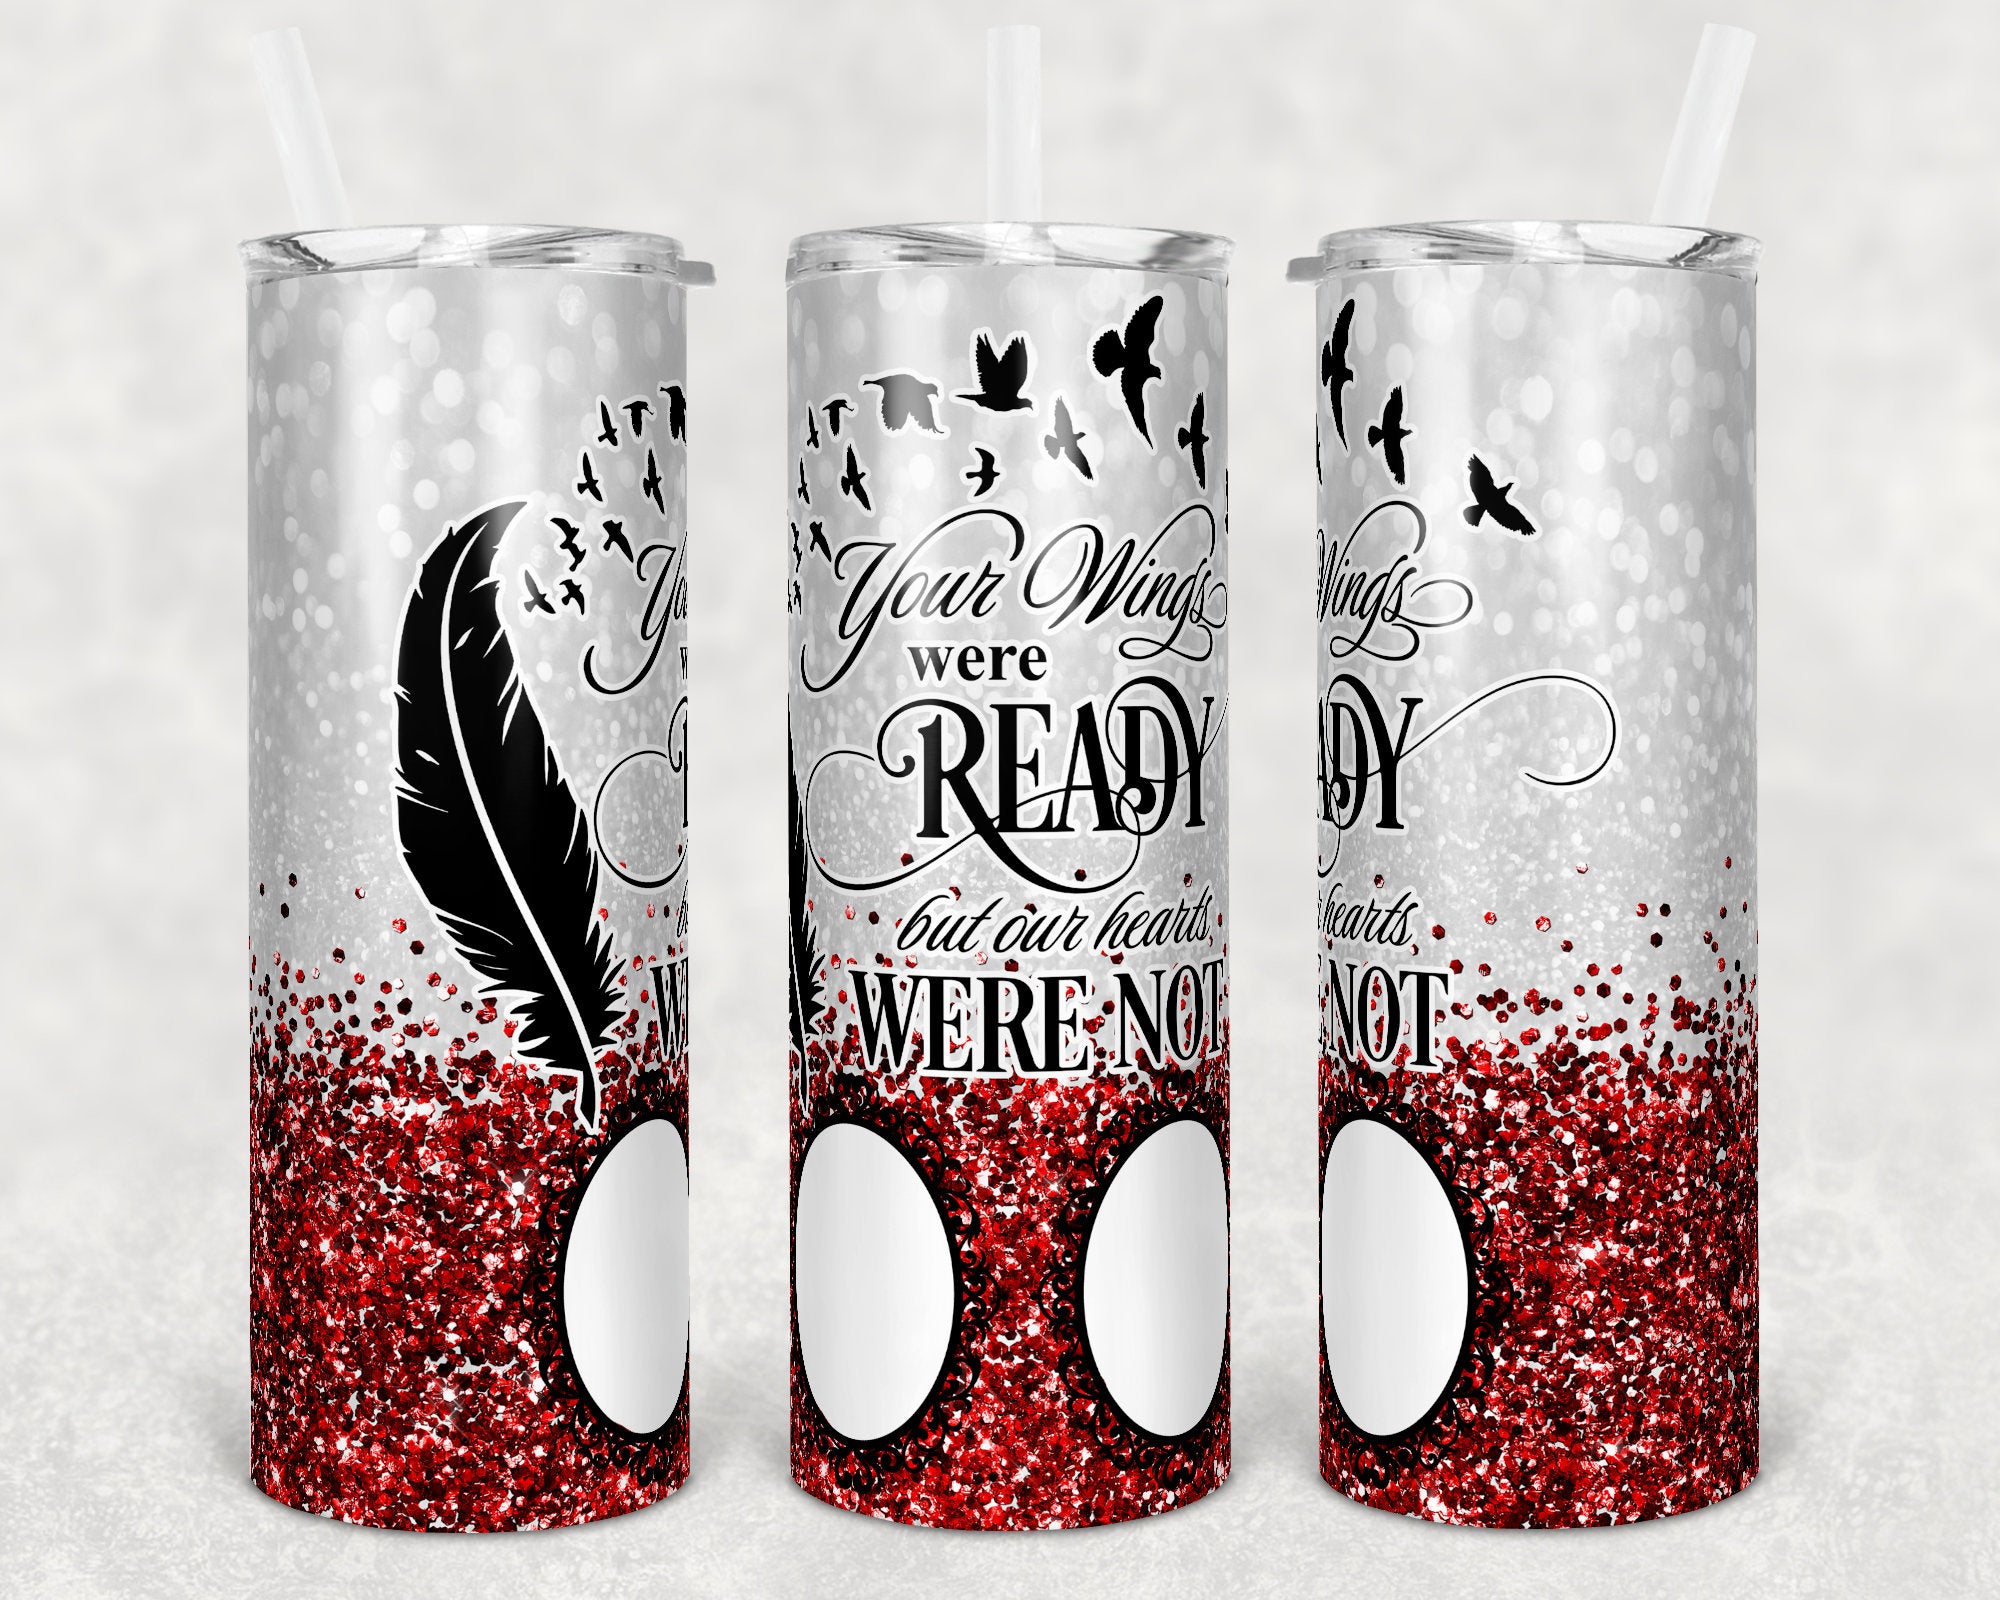 20 Oz Skinny Tumbler Memorial With 2 Photo Frames Red Glitter Wings Were Ready Personalized Design